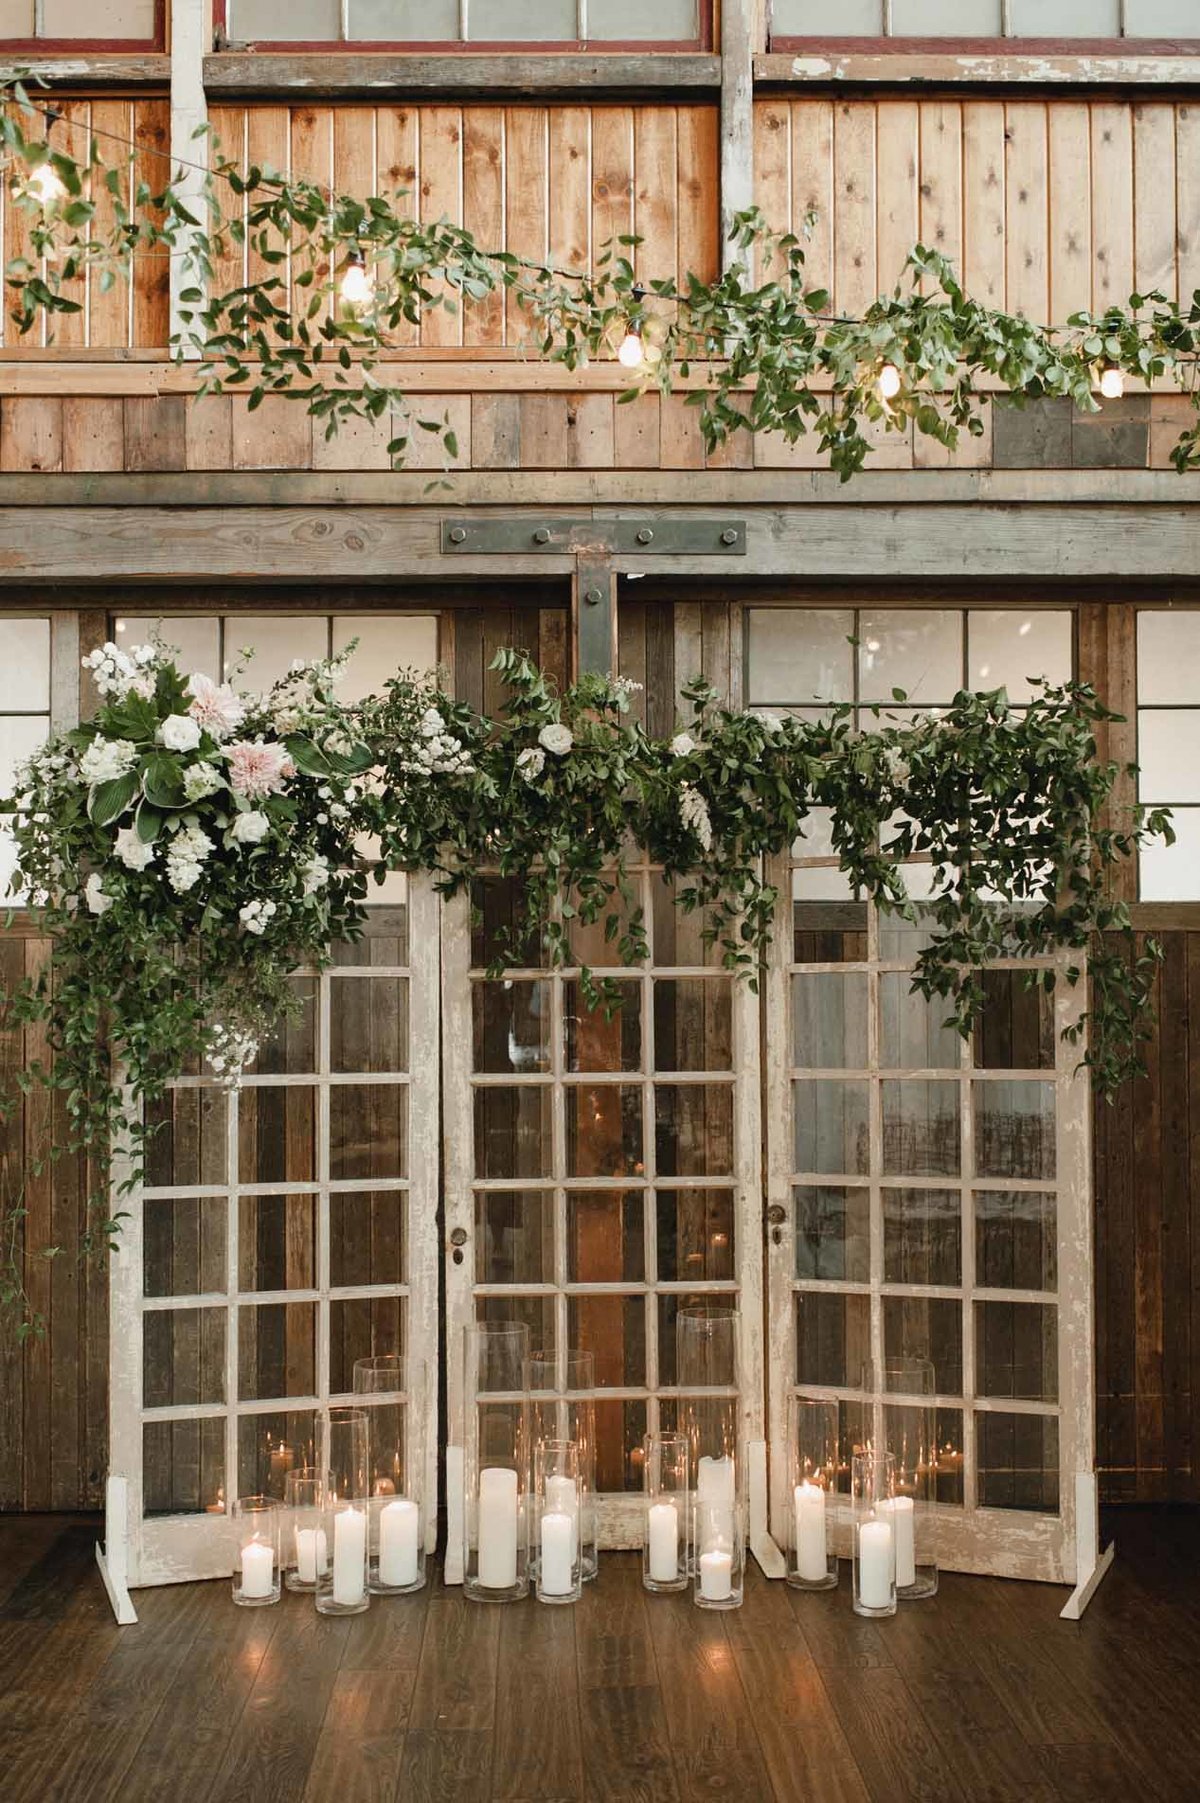 These reclaimed french doors that we covered in greens and cafe au lait dahlias make a striking wedding ceremony backdrop.